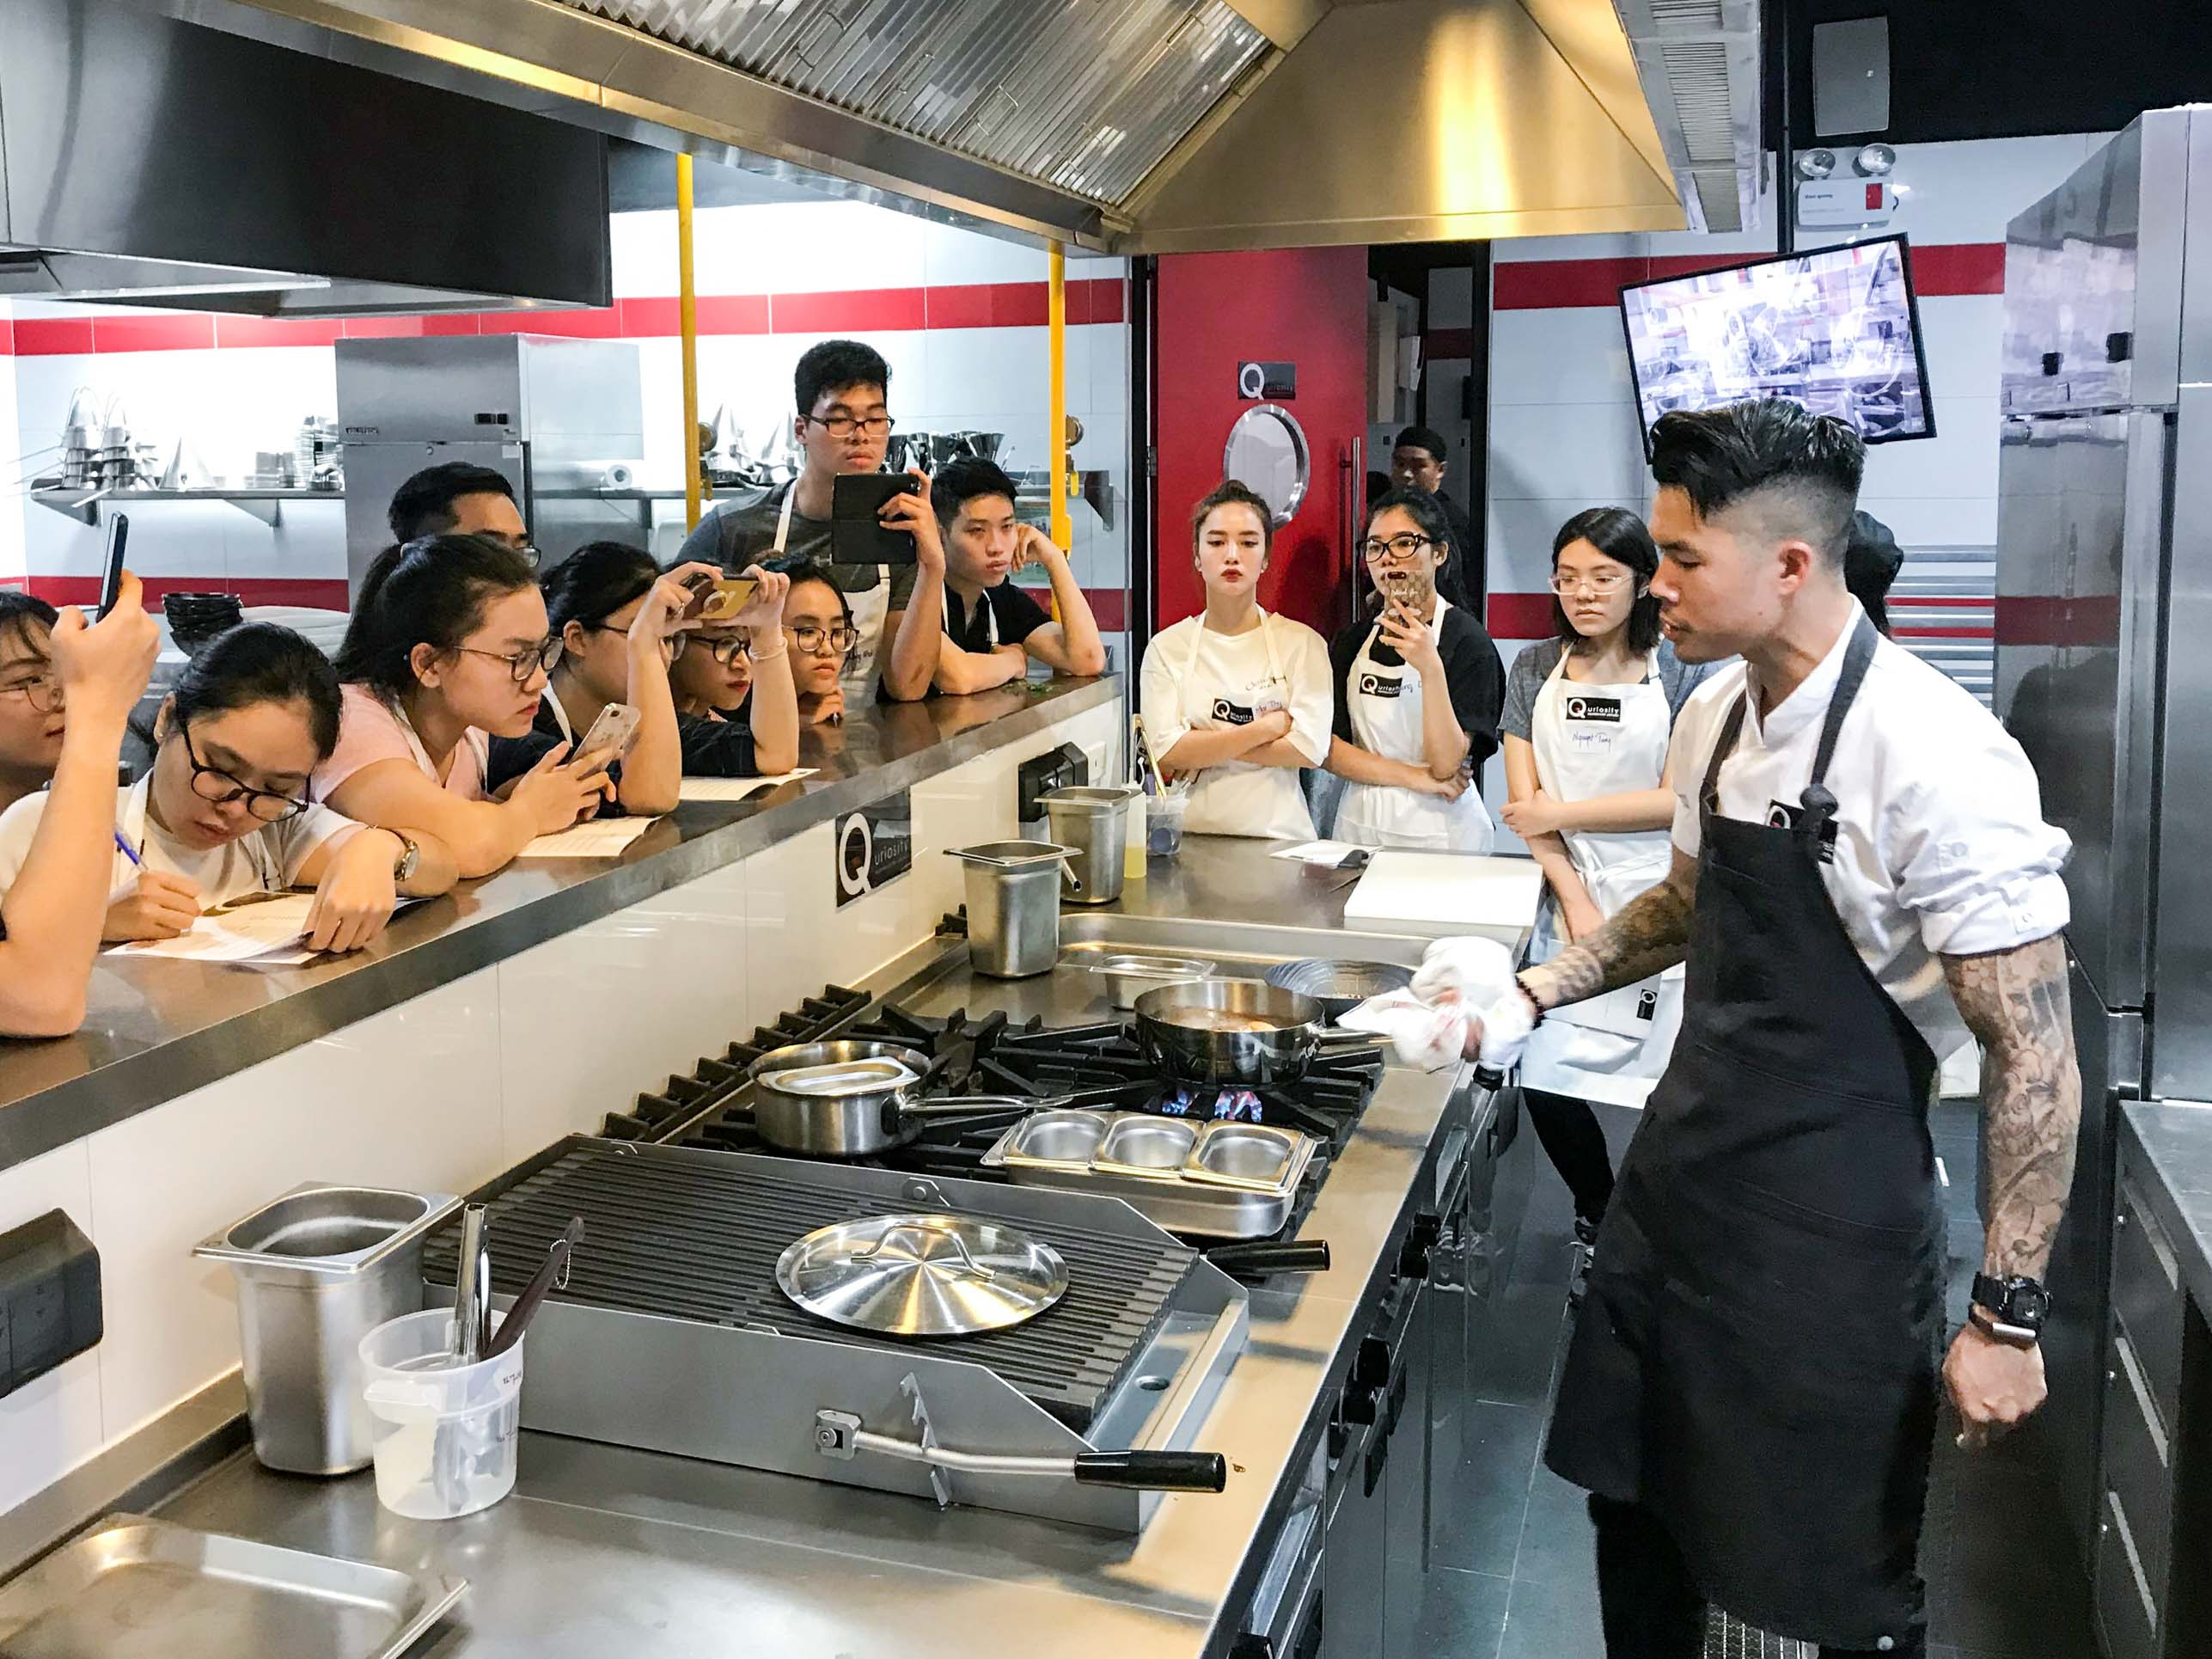 Tourism and Hospitality Management students gain practical experience at Q Industries, one of the University’s industry partners. Q Industries is set up like a hotel, complete with a restaurant and supermarket, where students can apply the theories learned in the classroom.